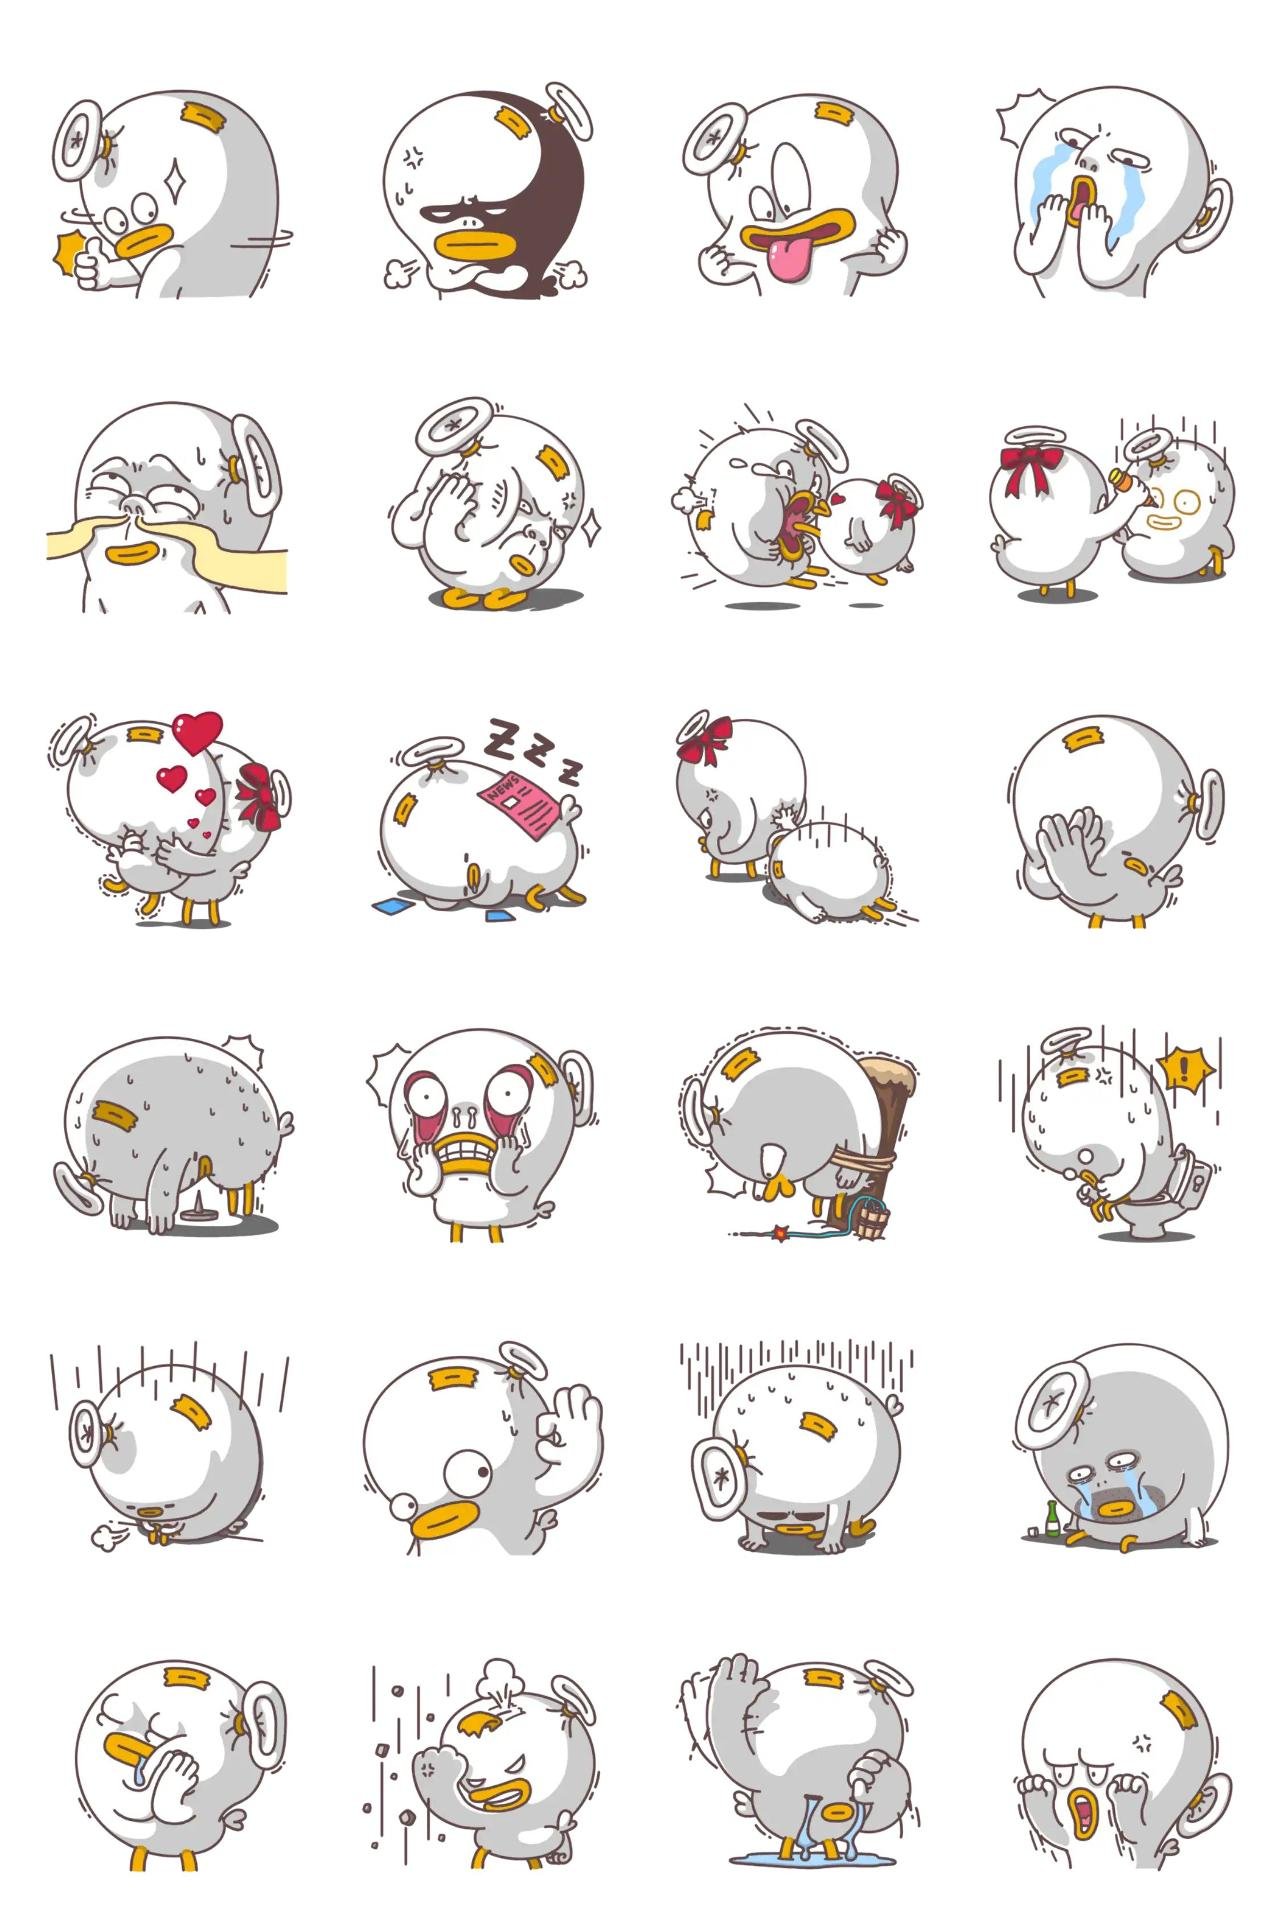 DUCKEY Animals,Etc. sticker pack for Whatsapp, Telegram, Signal, and others chatting and message apps